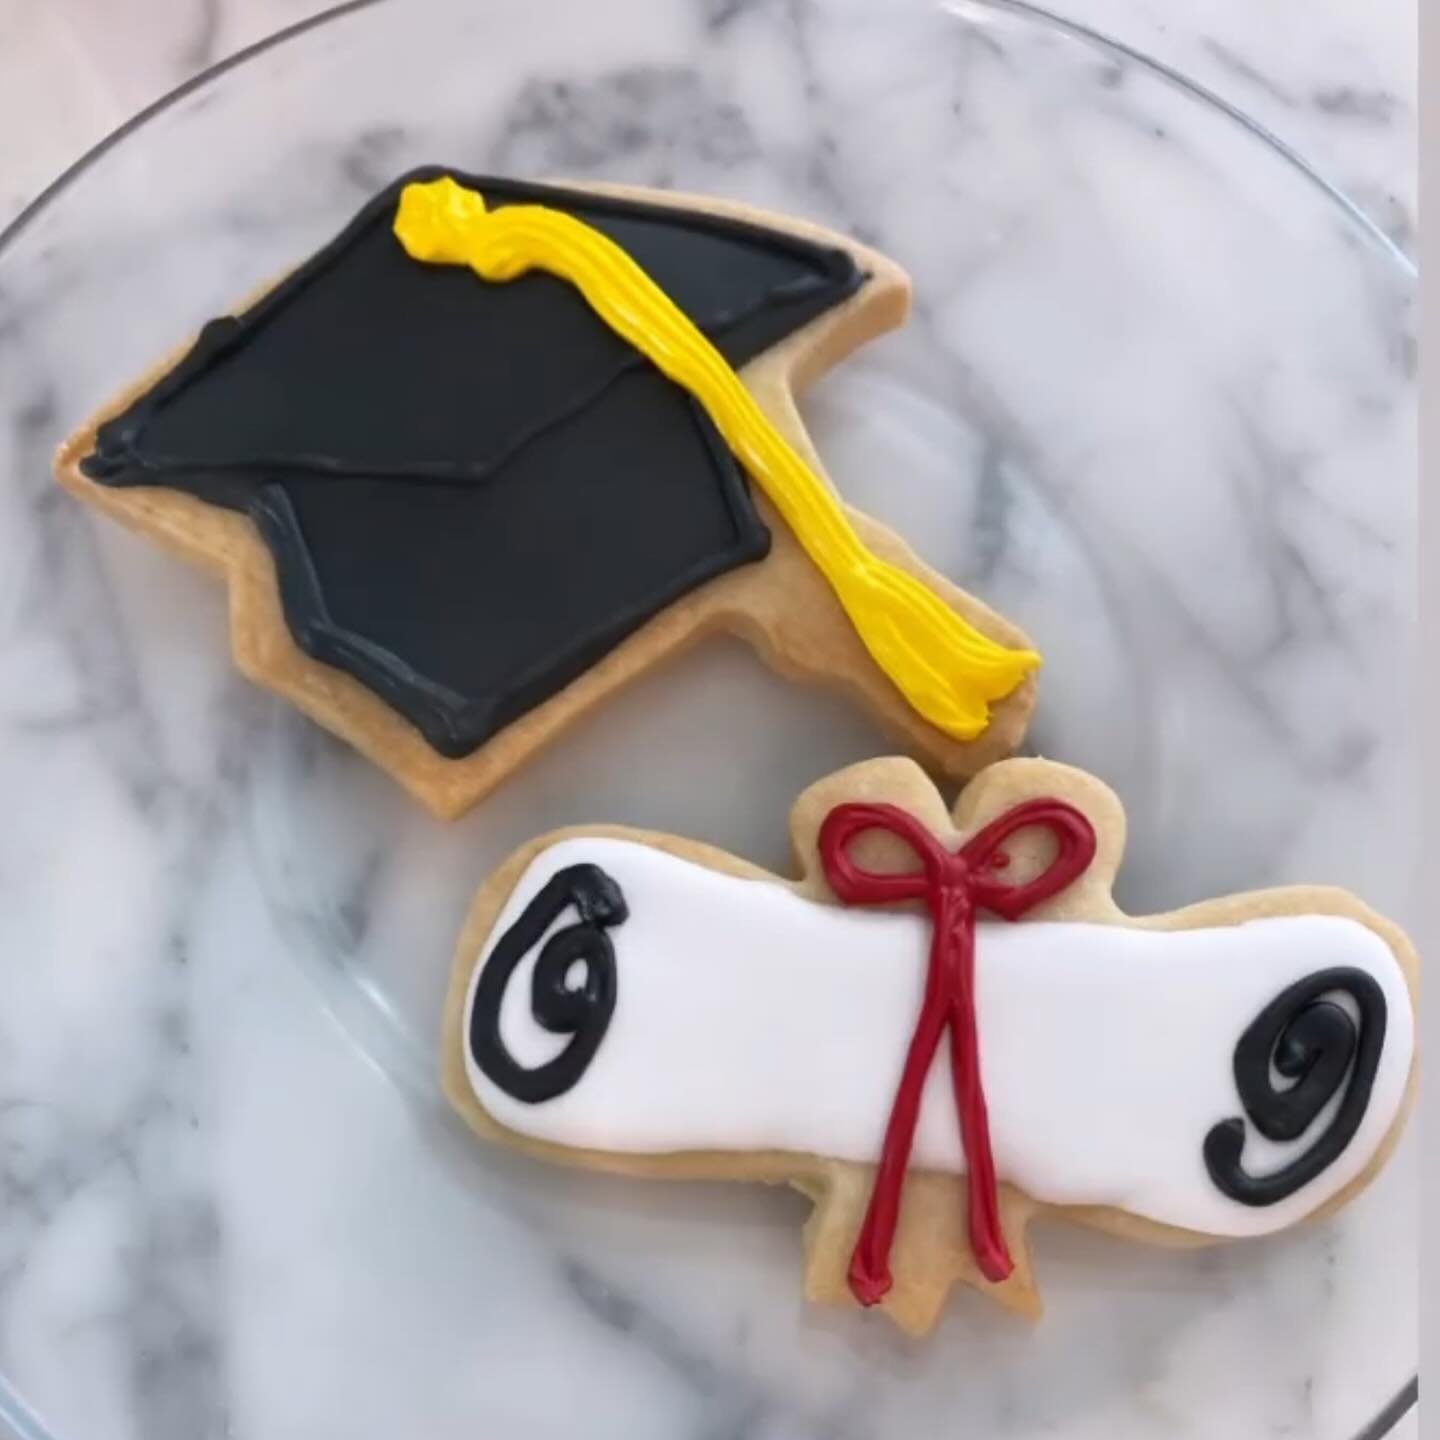 Need a lil something for the Grad in your life? Call us.  Iced Cookies ($5 for the pair) / Canvas Totes $20 / Mini Cakes $15